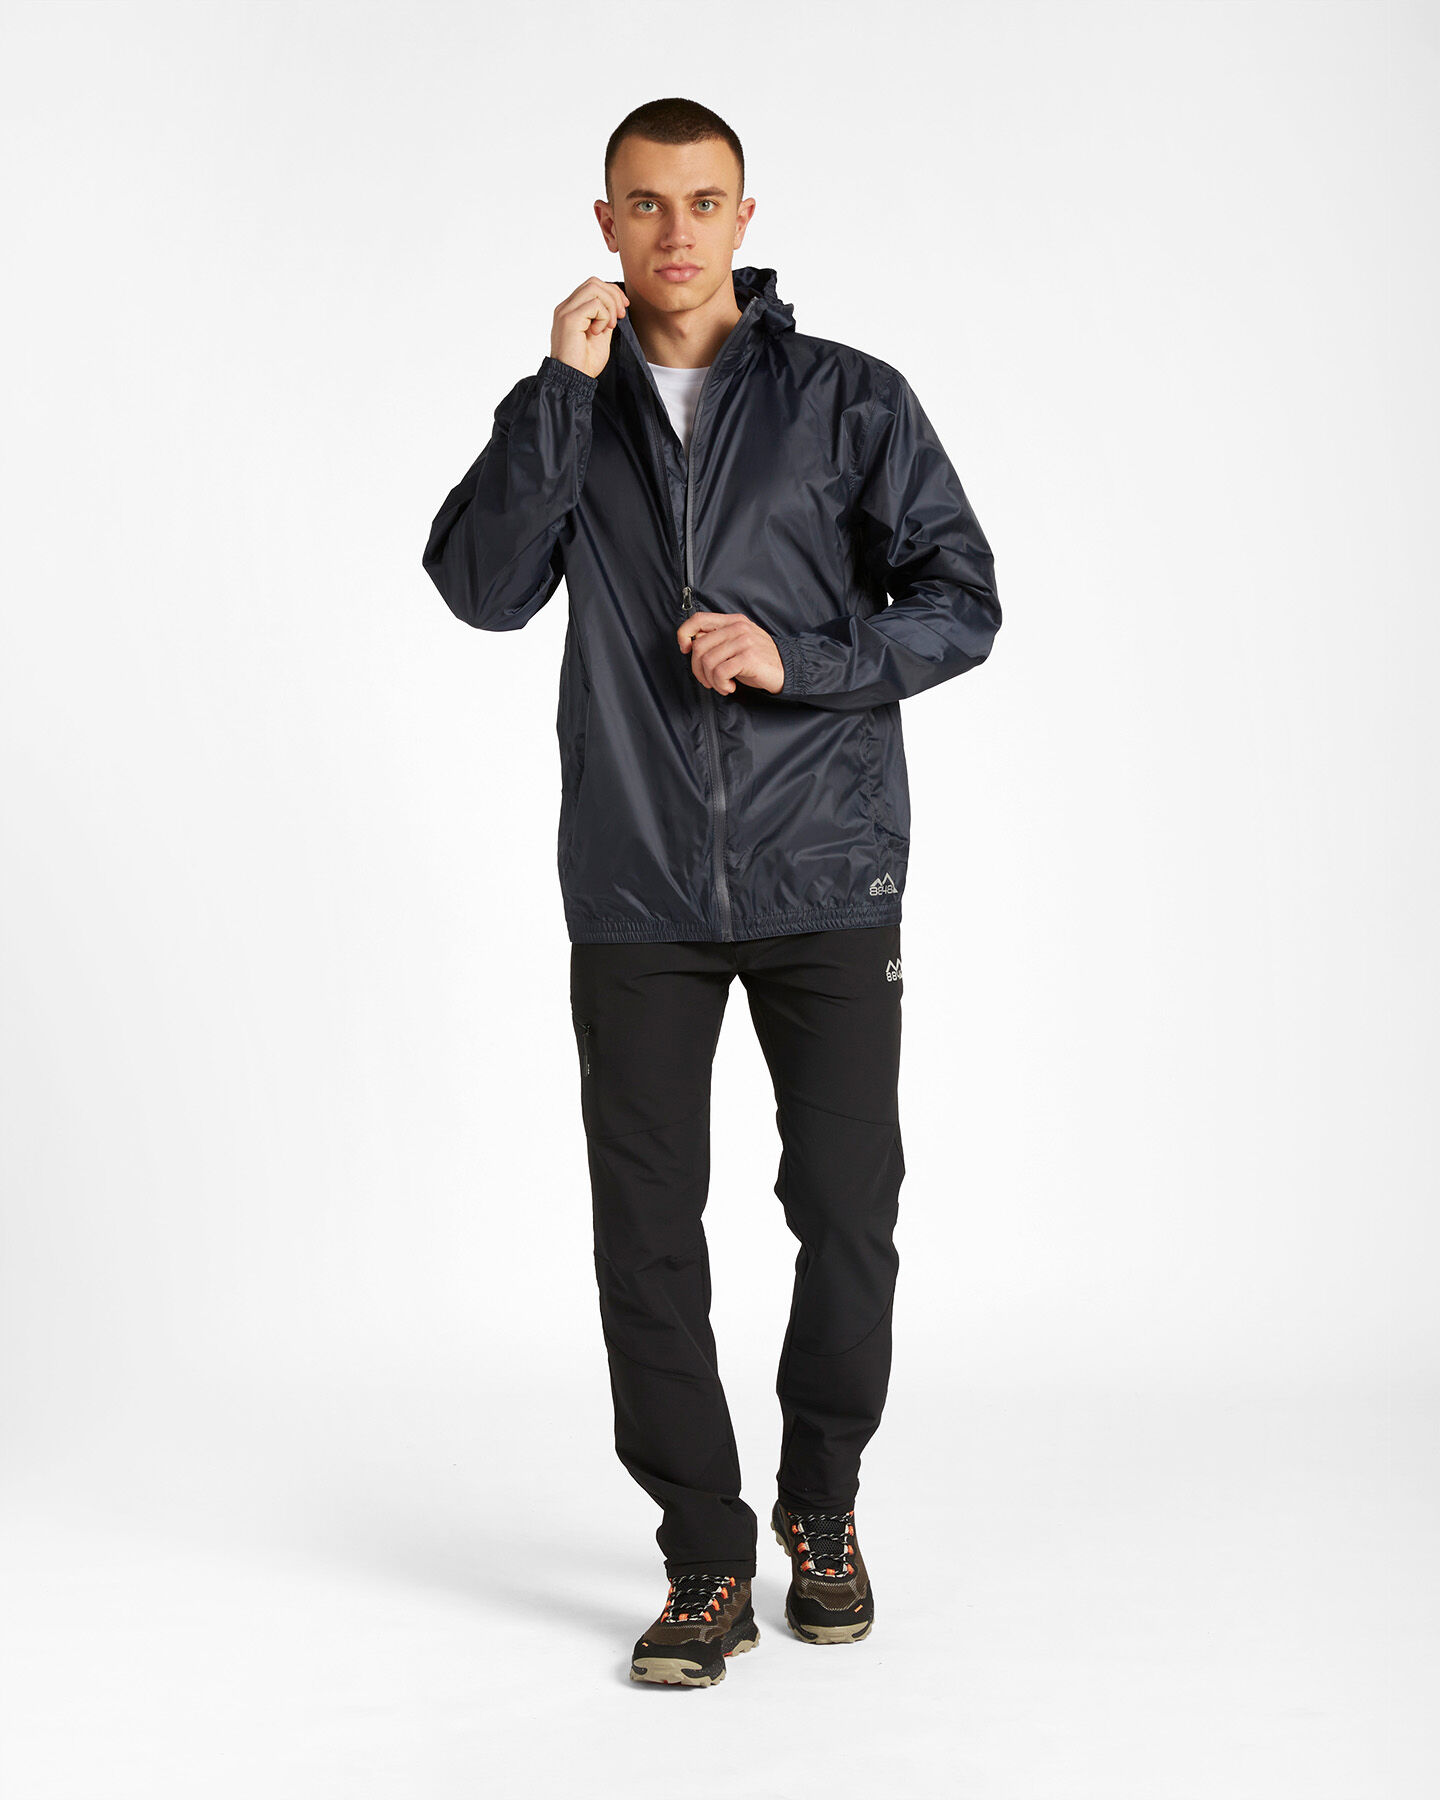  Giacca antipioggia 8848 RAIN PACKABLE M S4076233|CO-NVY|S scatto 1